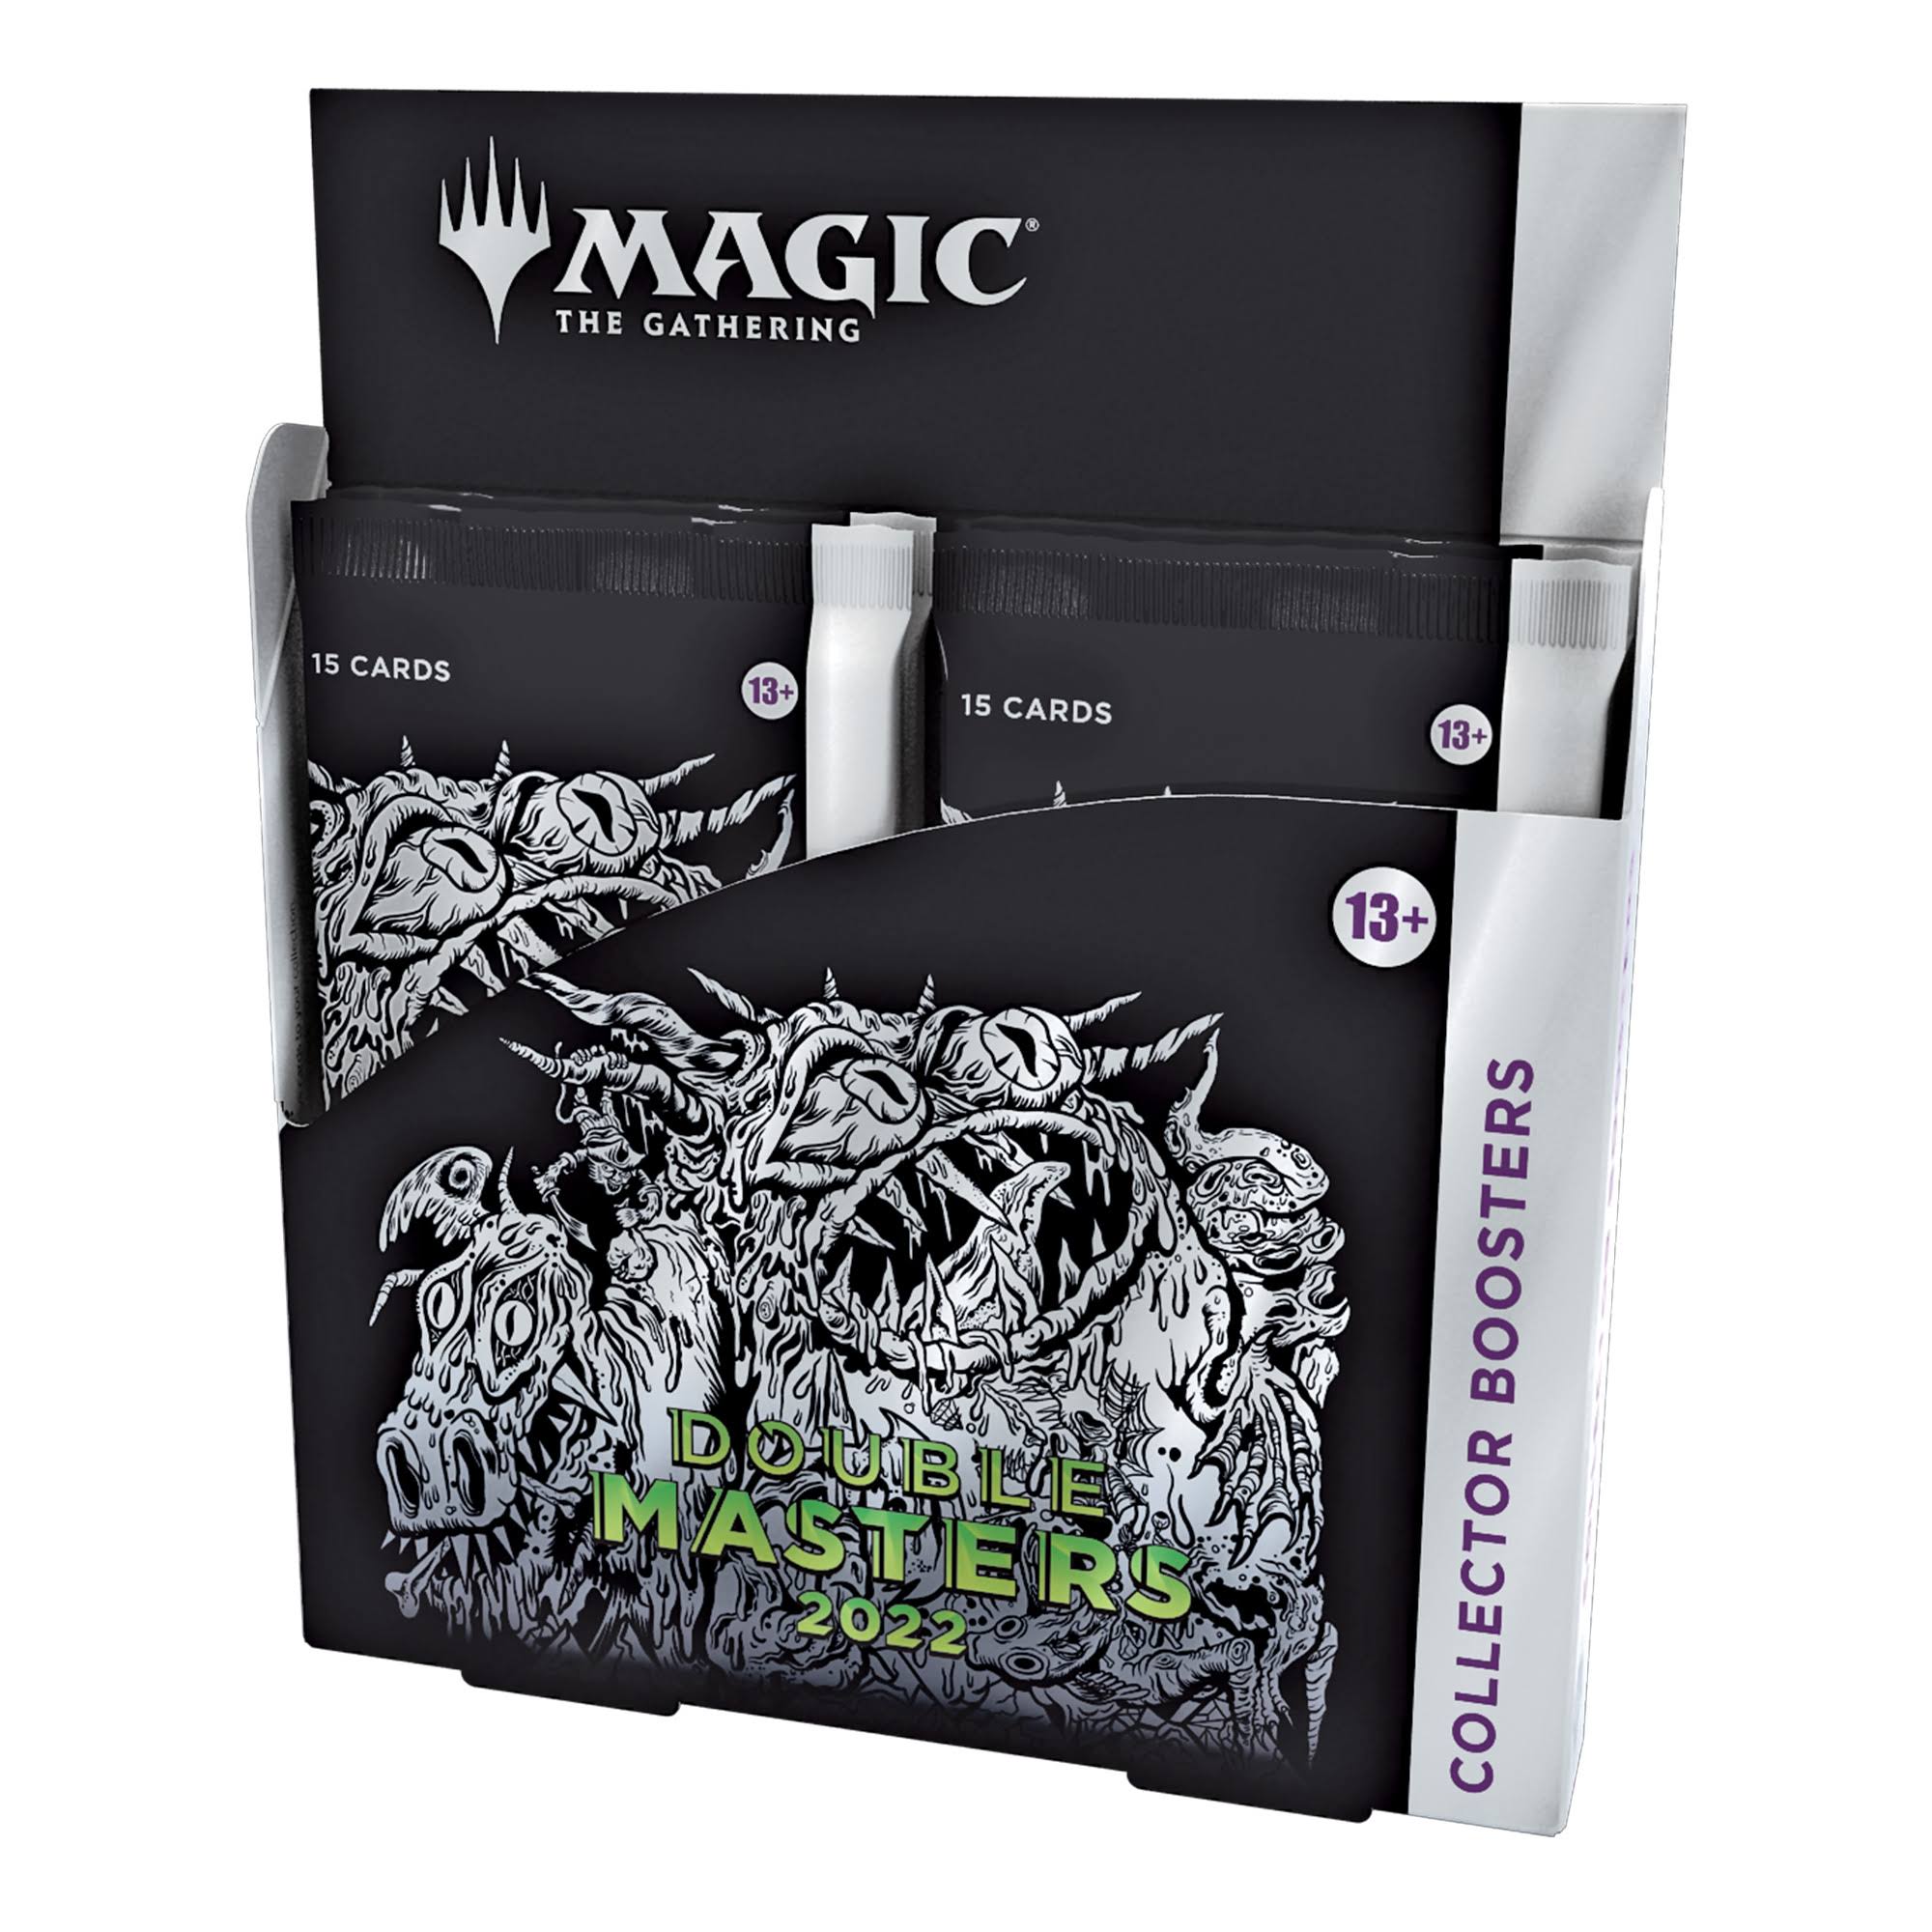 Magic The Gathering Double Masters 2022 - Collector Booster Box